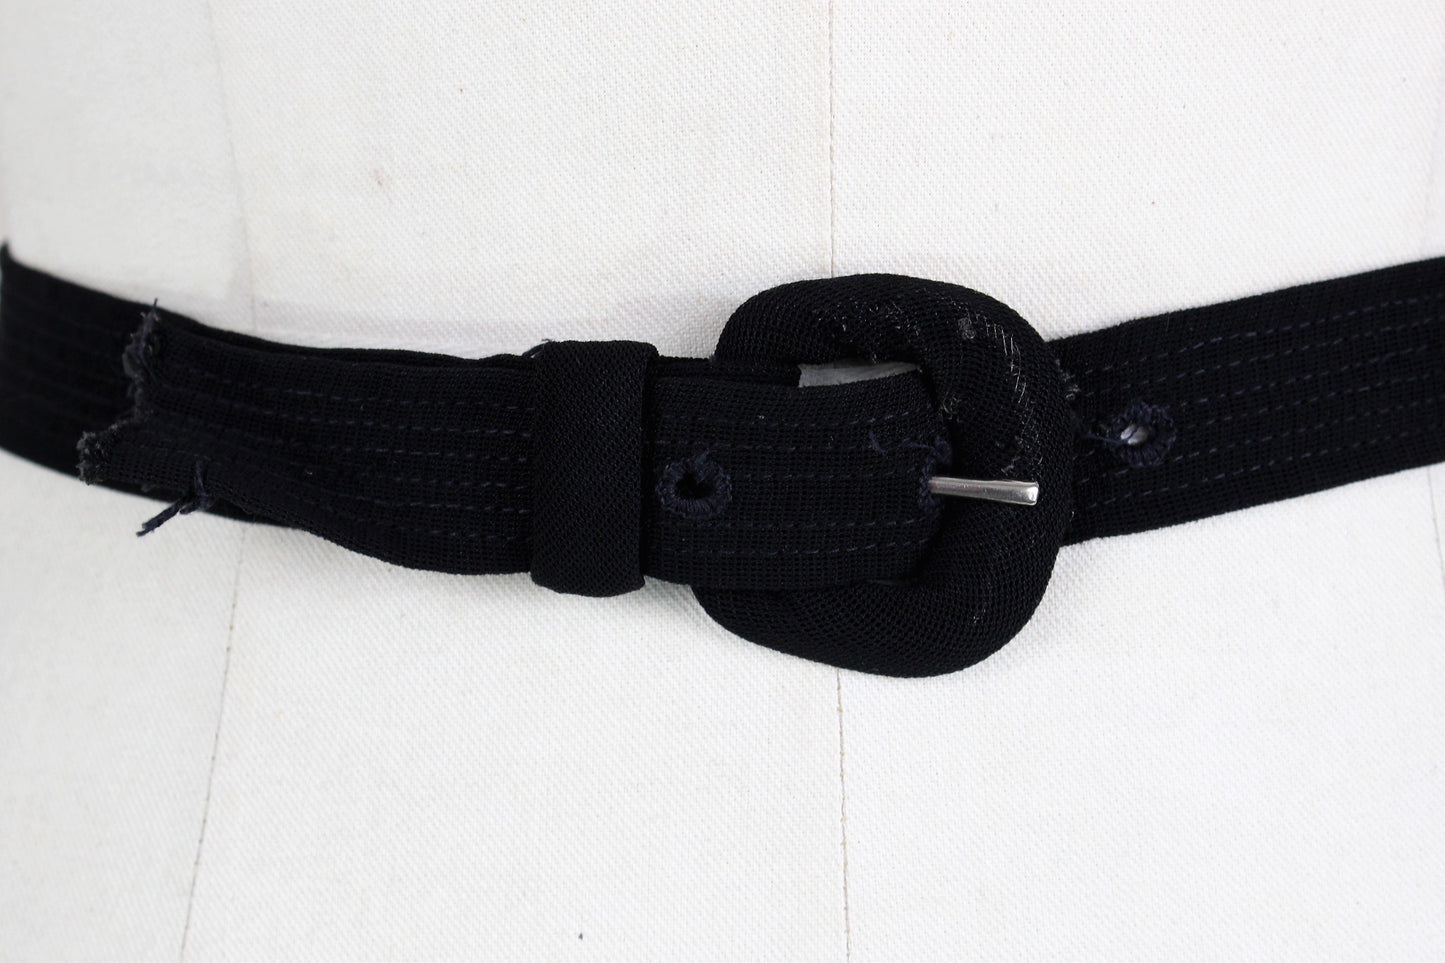 Vintage 1940s Black Rayon Belt With Buckle